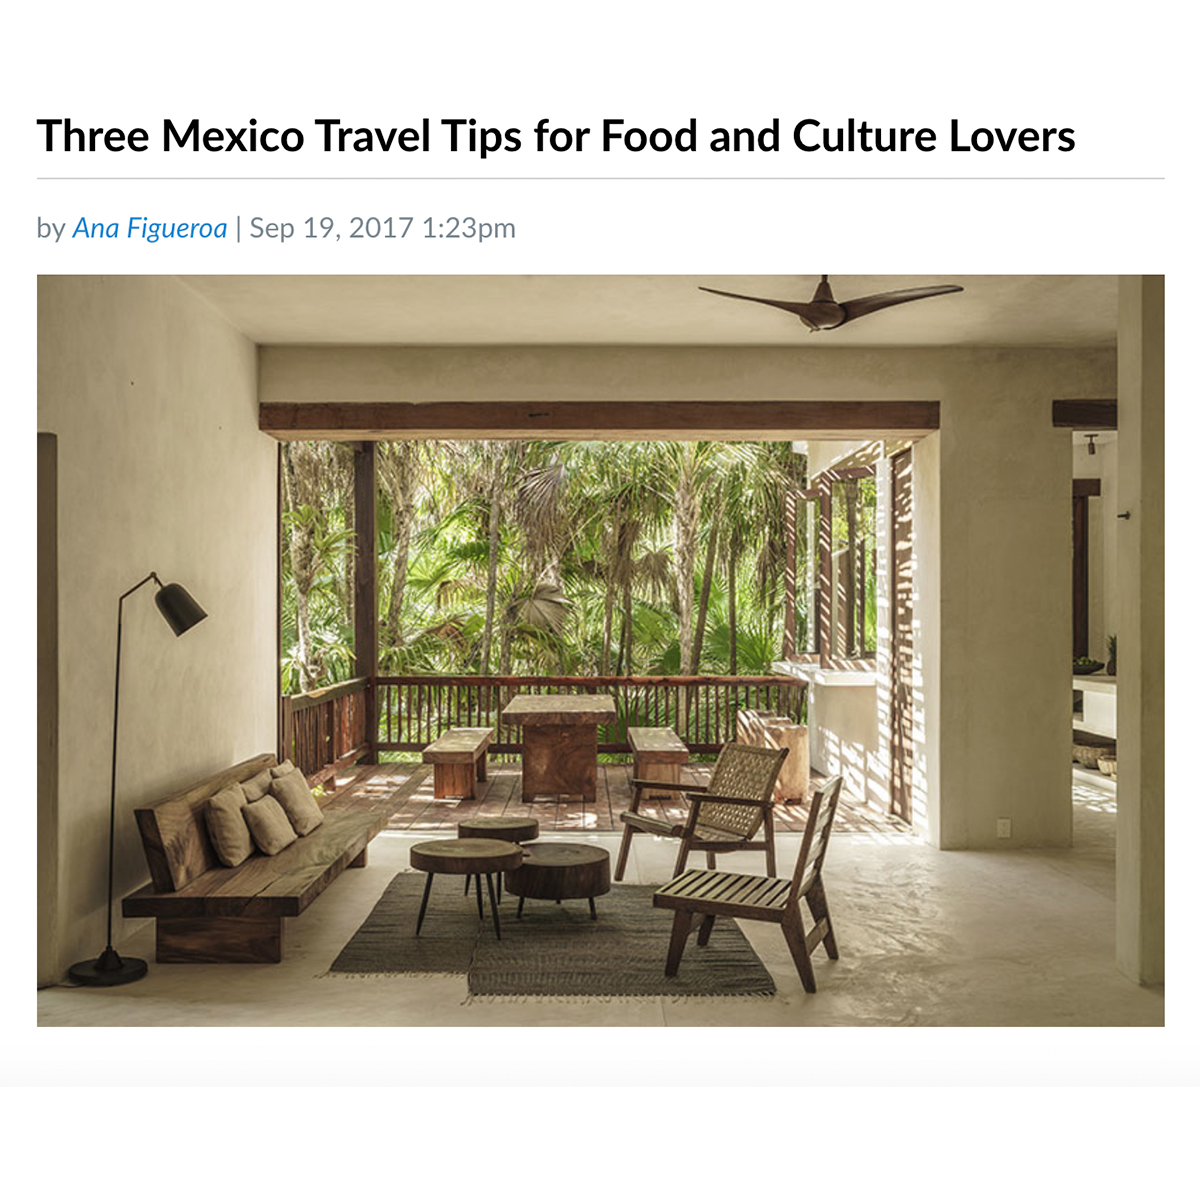 Three Mexico Travel Tips for Food and Culture Lovers